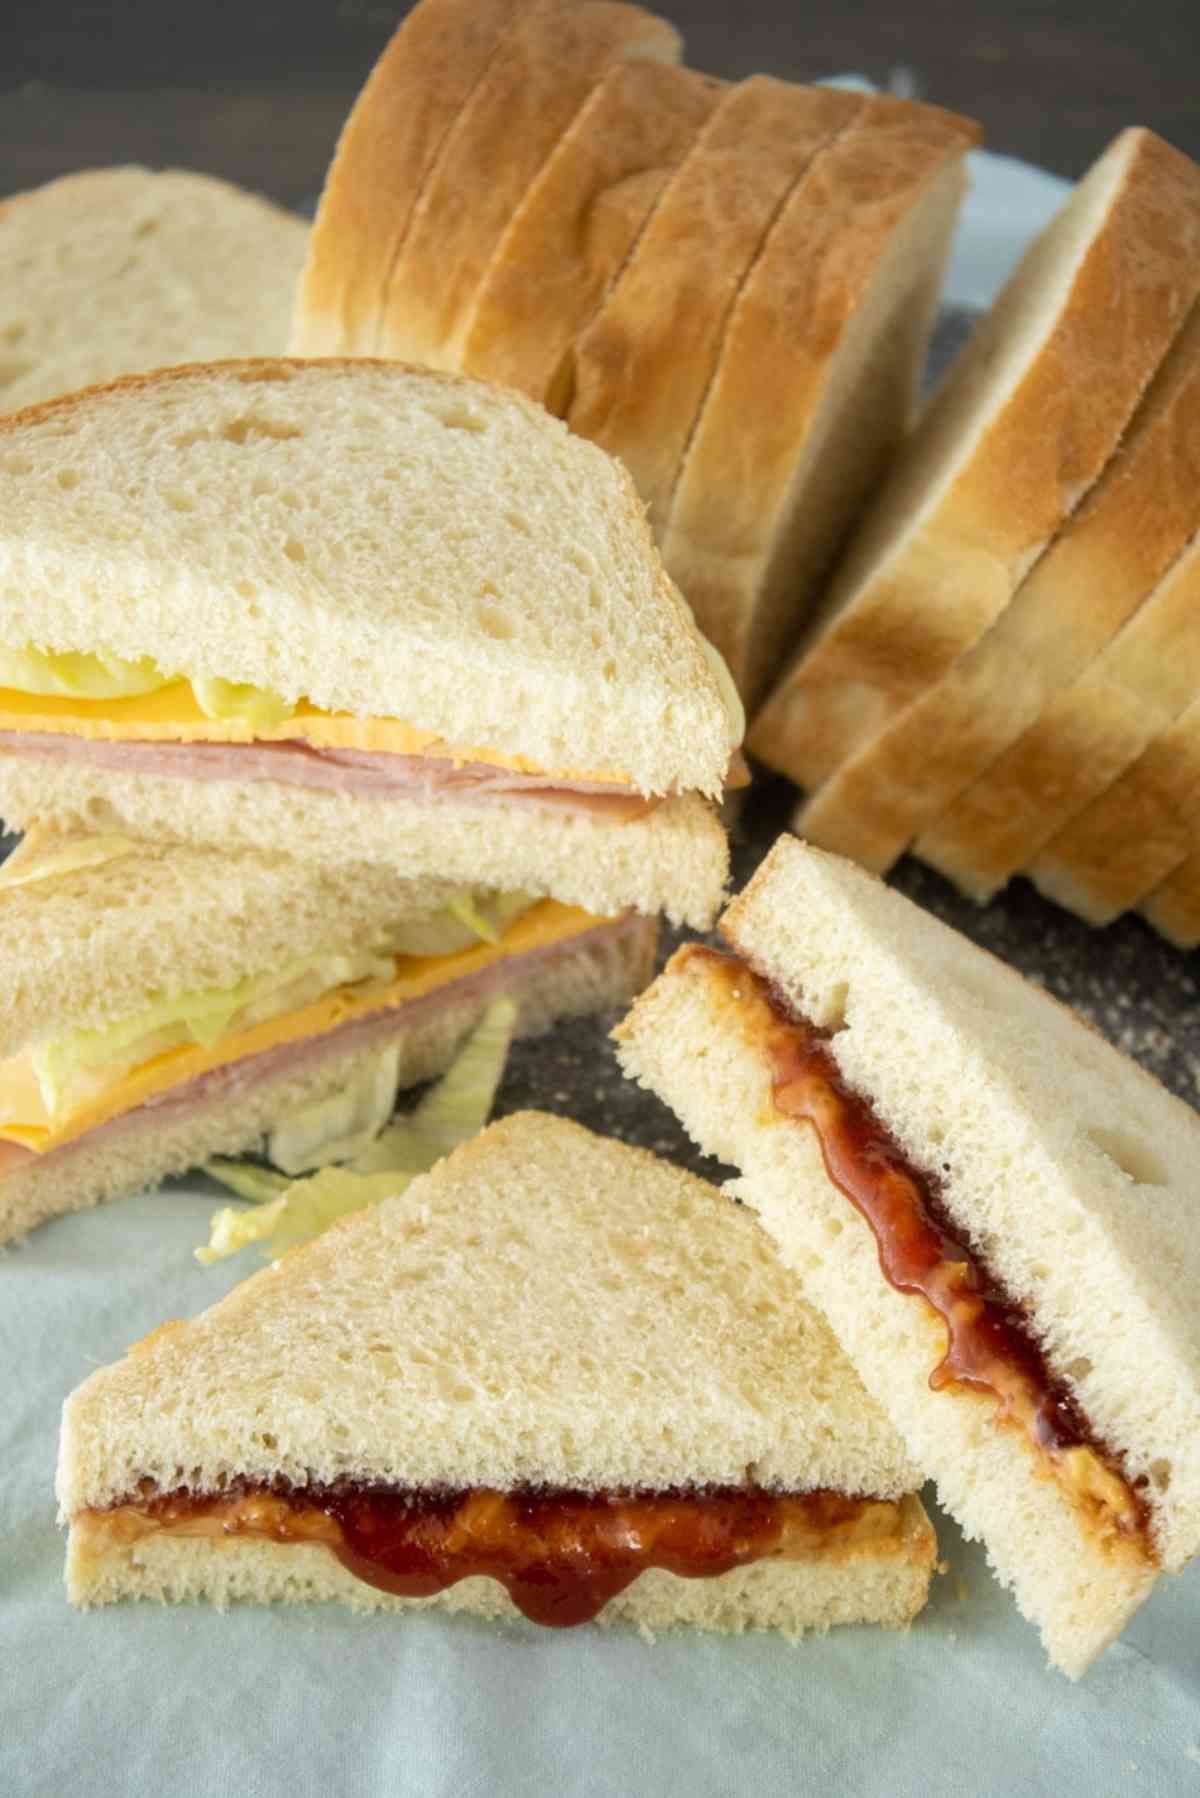 Sliced loaf of bread next to a ham sandwich.